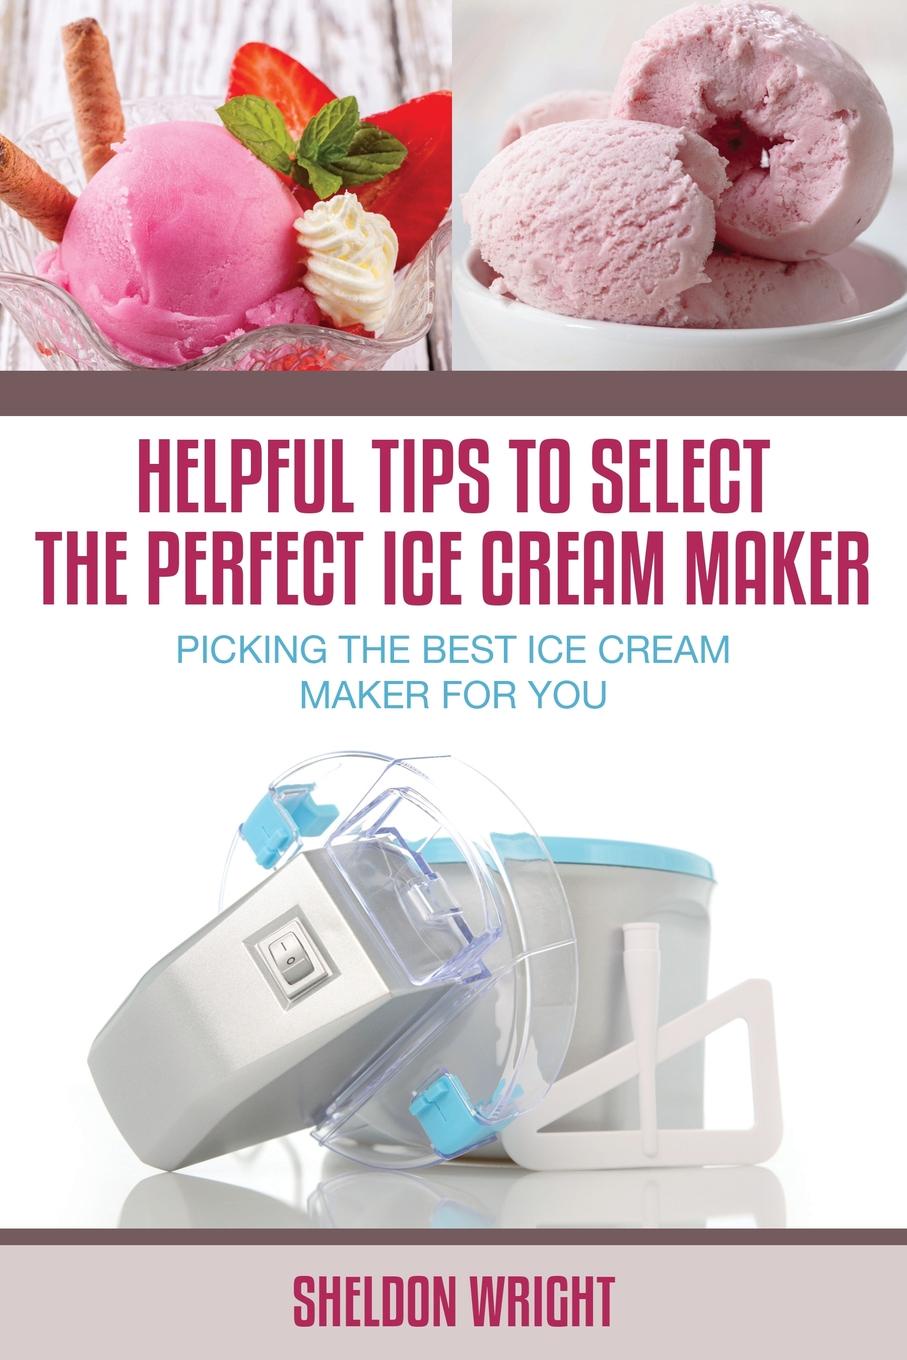 Sheldon Wright Helpful Tips to Select the Perfect Ice Cream Maker. Picking the Best Ice Cream Maker for You